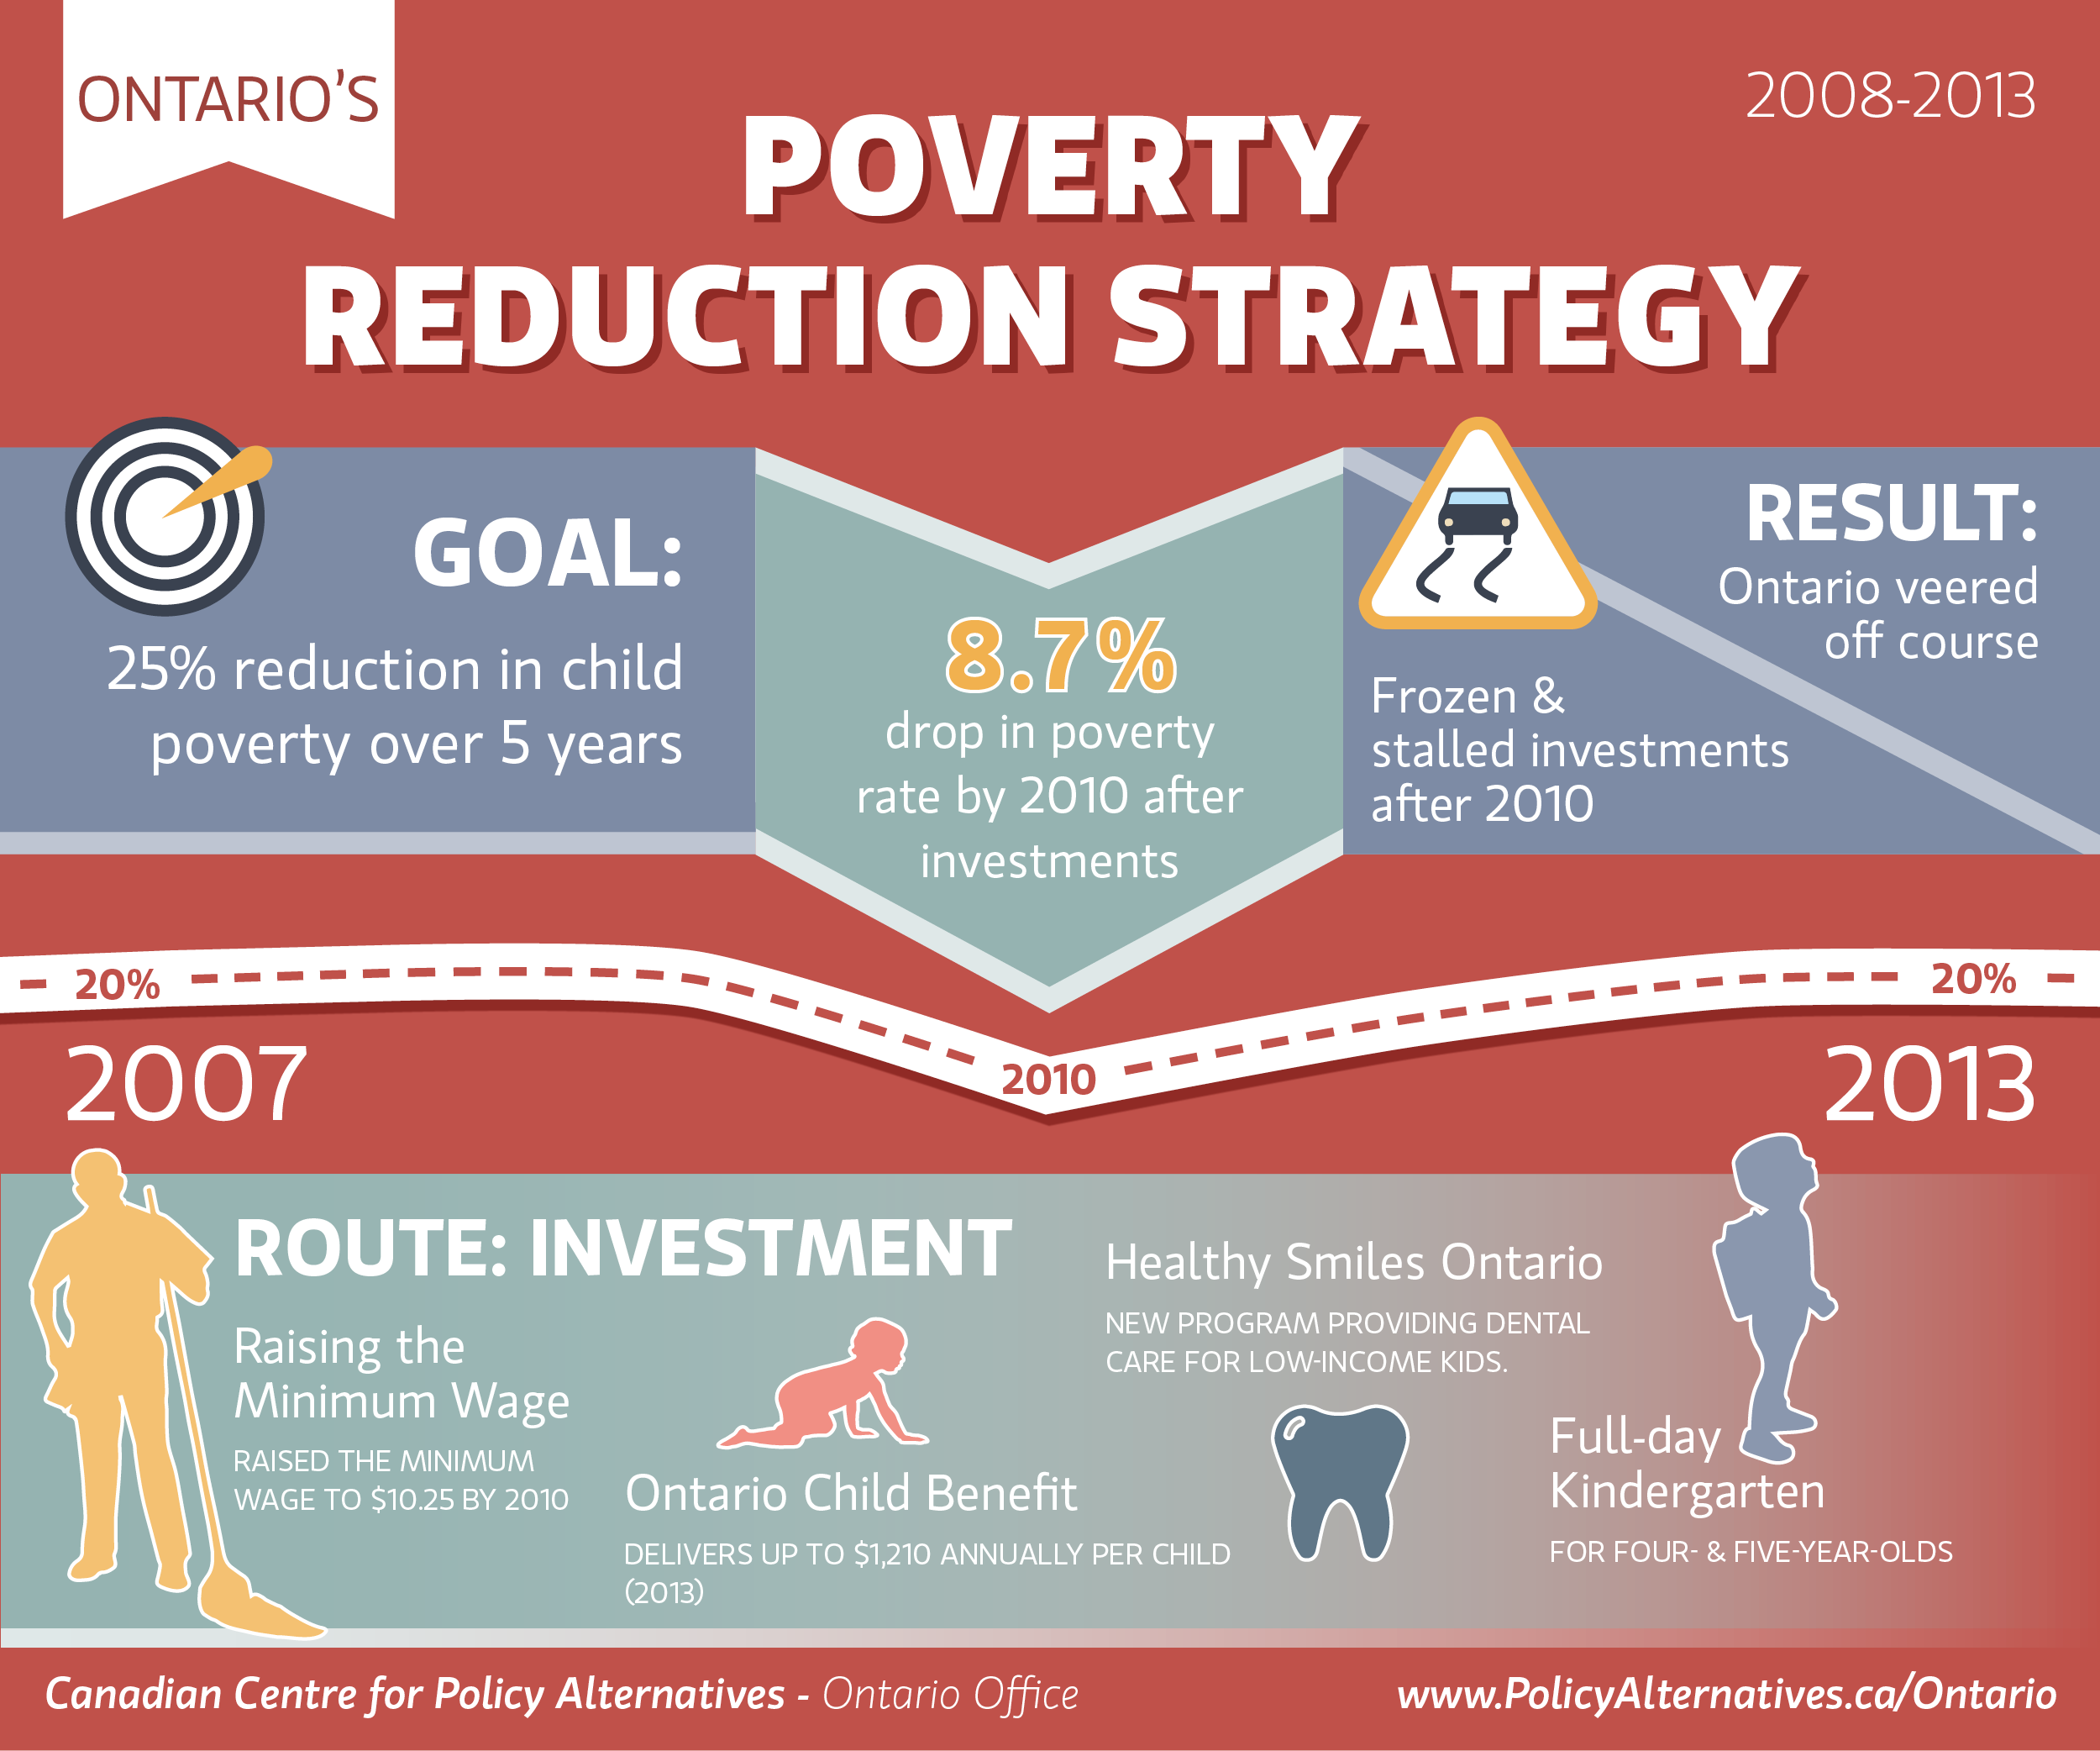 5 lessons from Ontario's first poverty reduction strategy